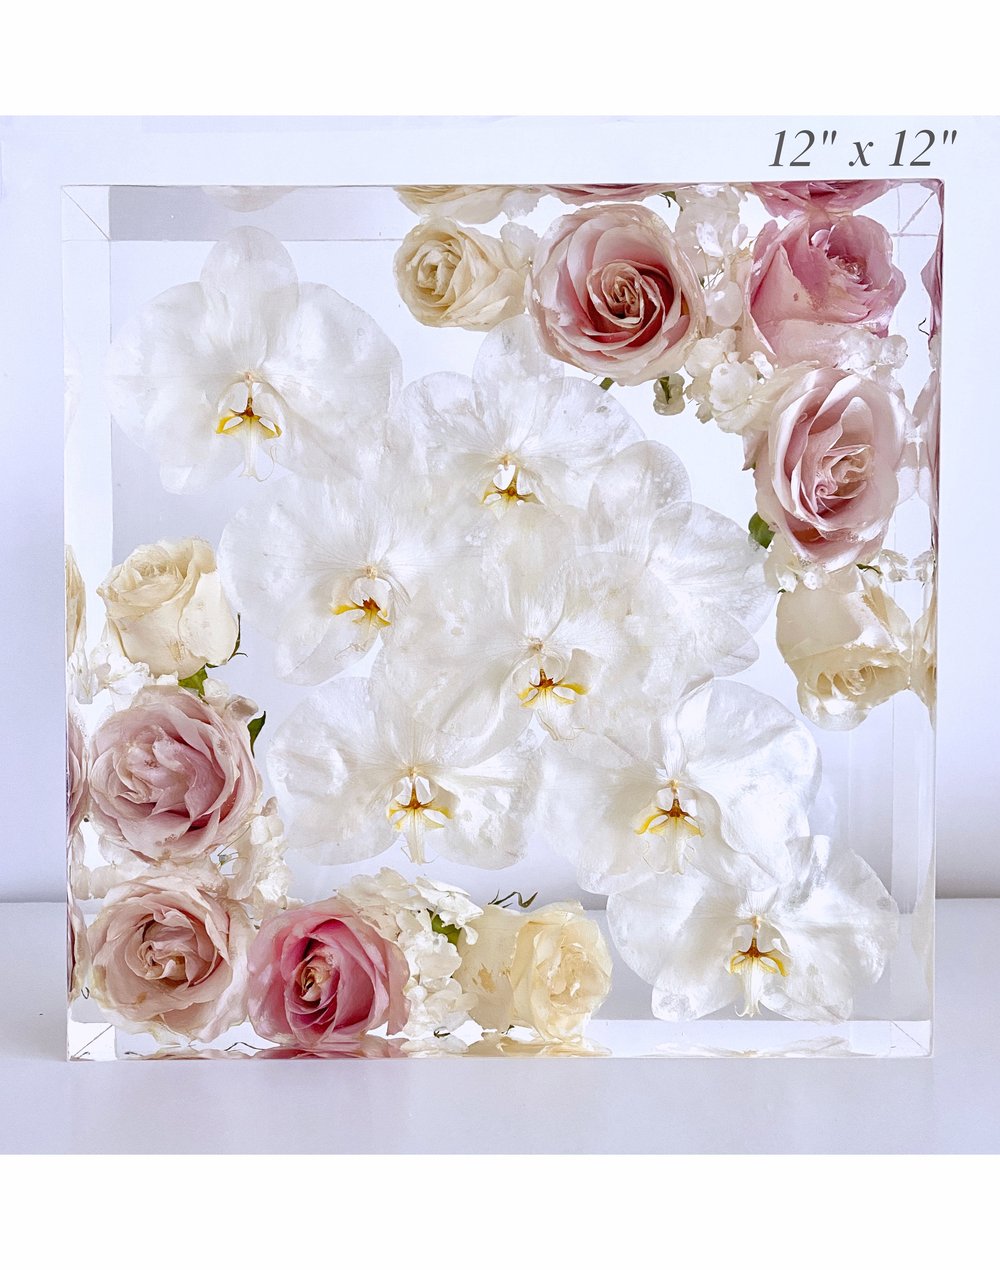 How to preserve wedding flowers in resin.💐💐 #bouquetpreservation #R, Resin Flowers